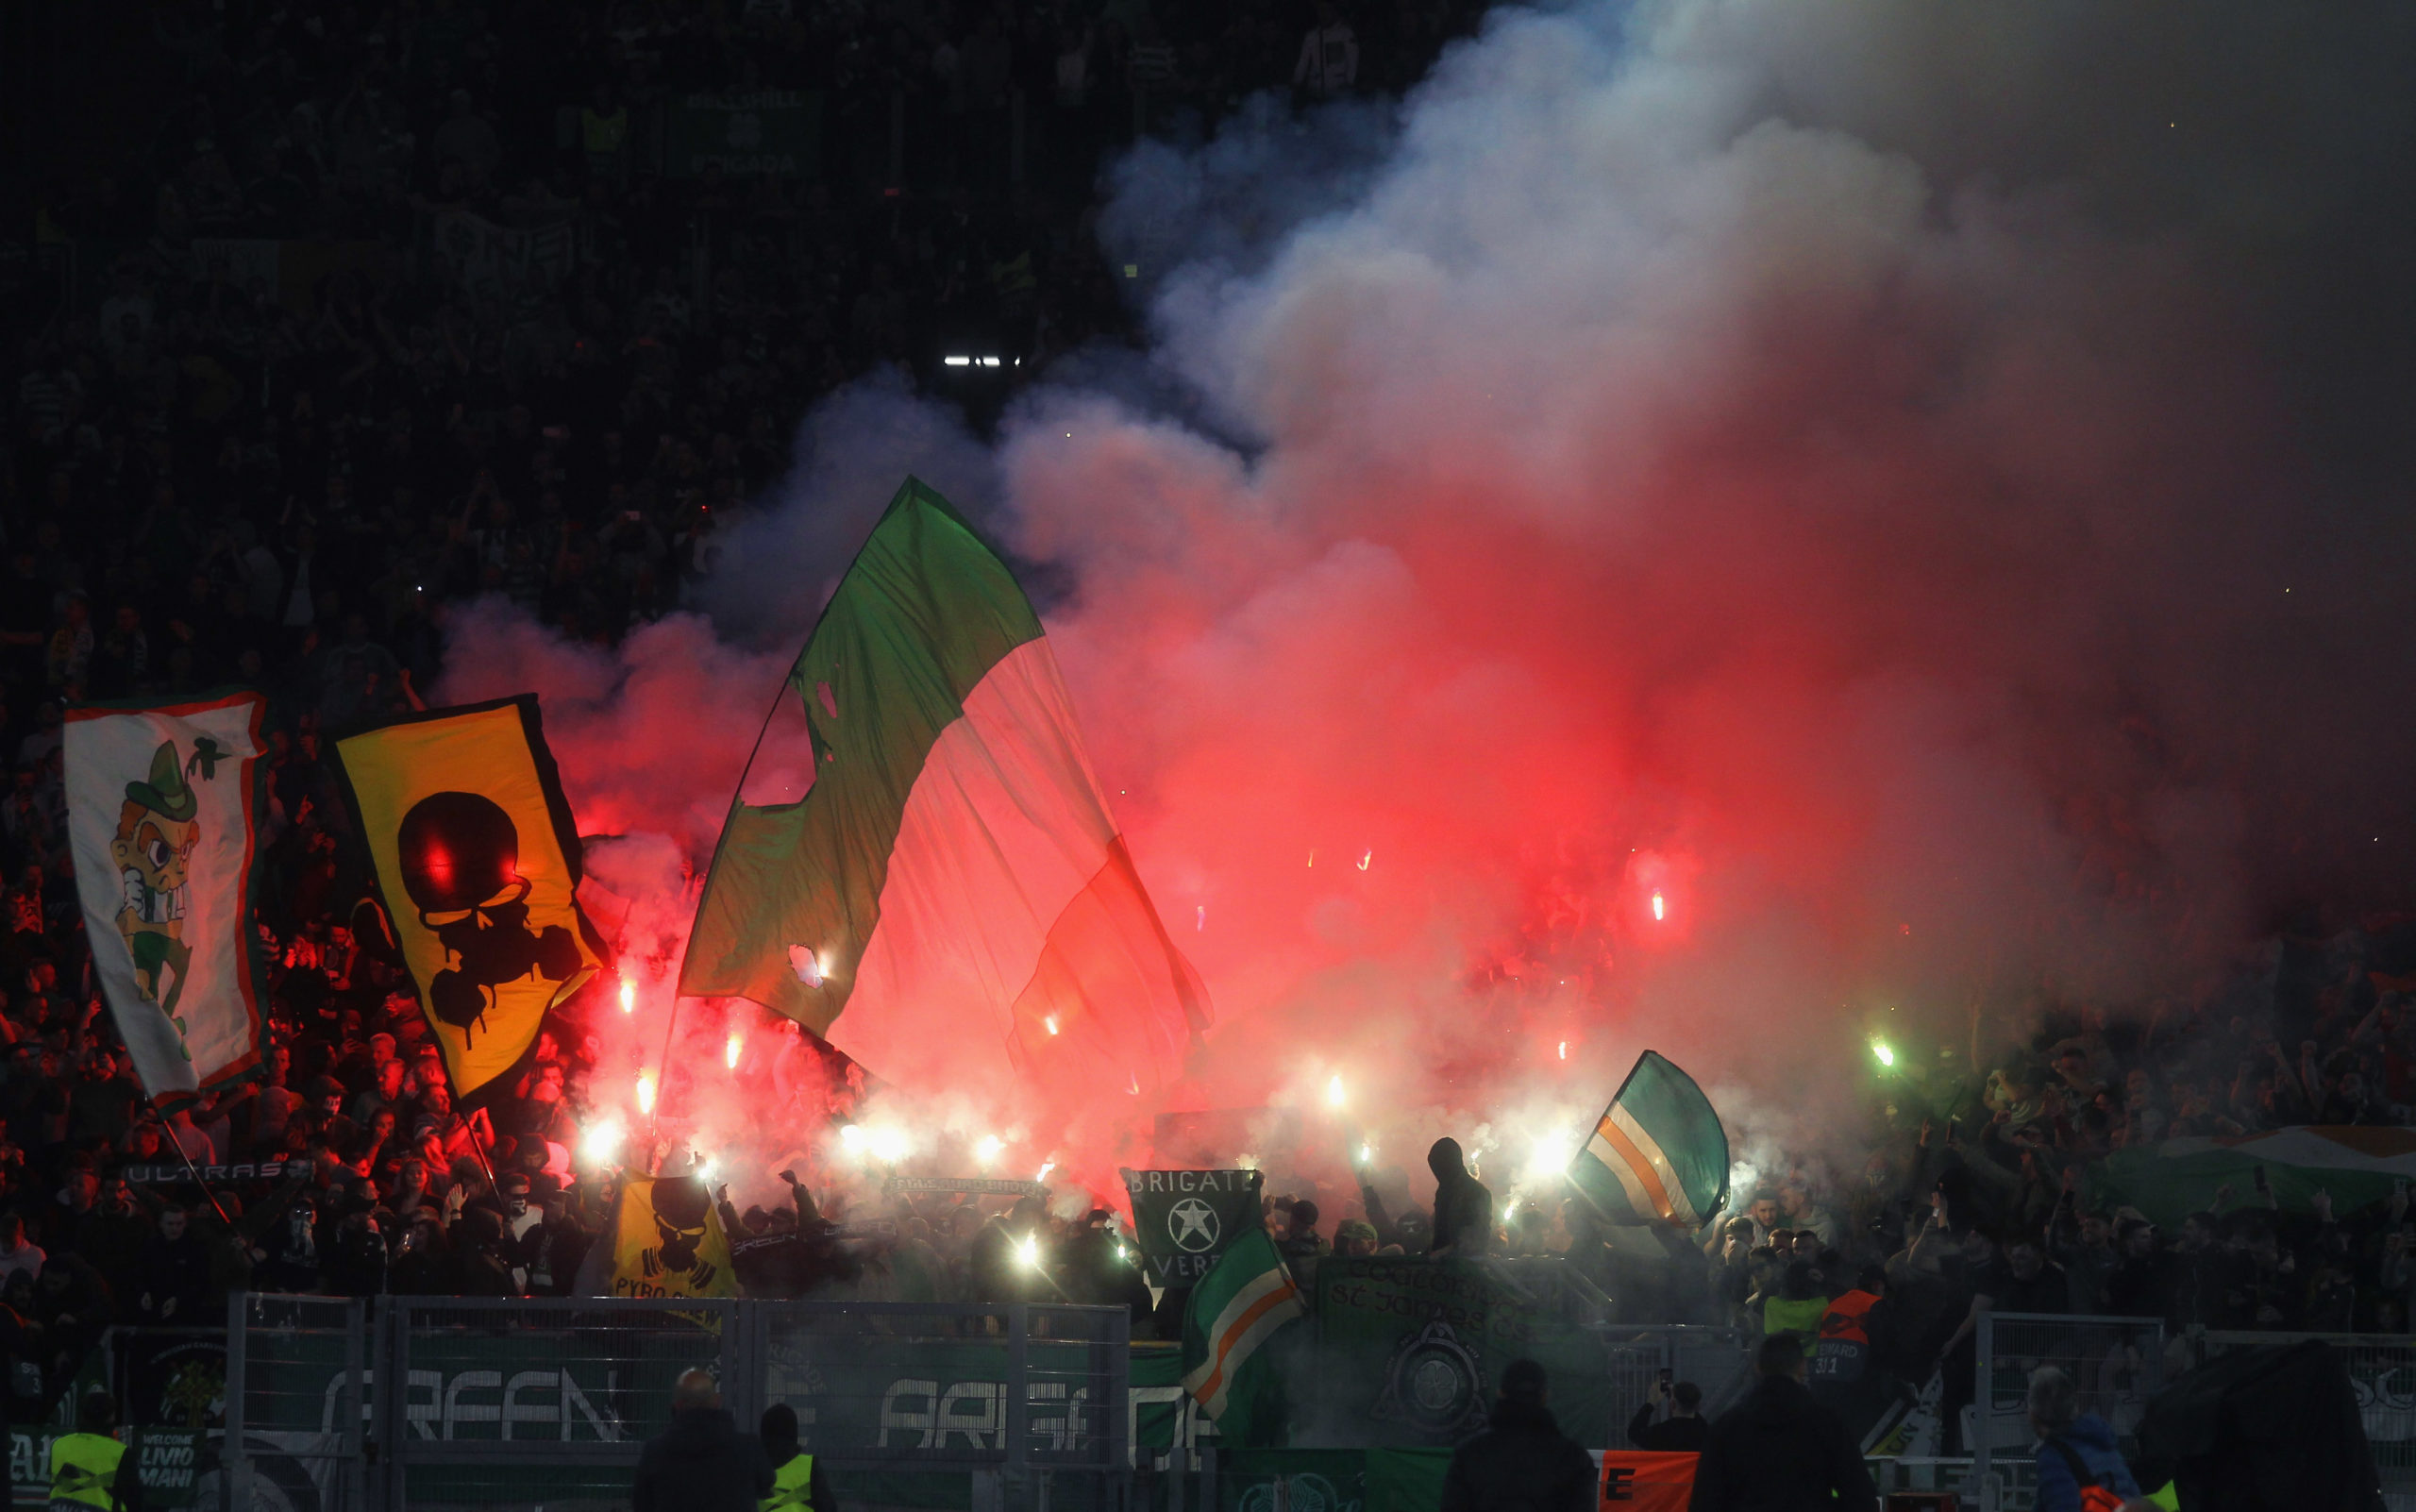 For Celtic fans, Al Jazeera doc is a massive opportunity